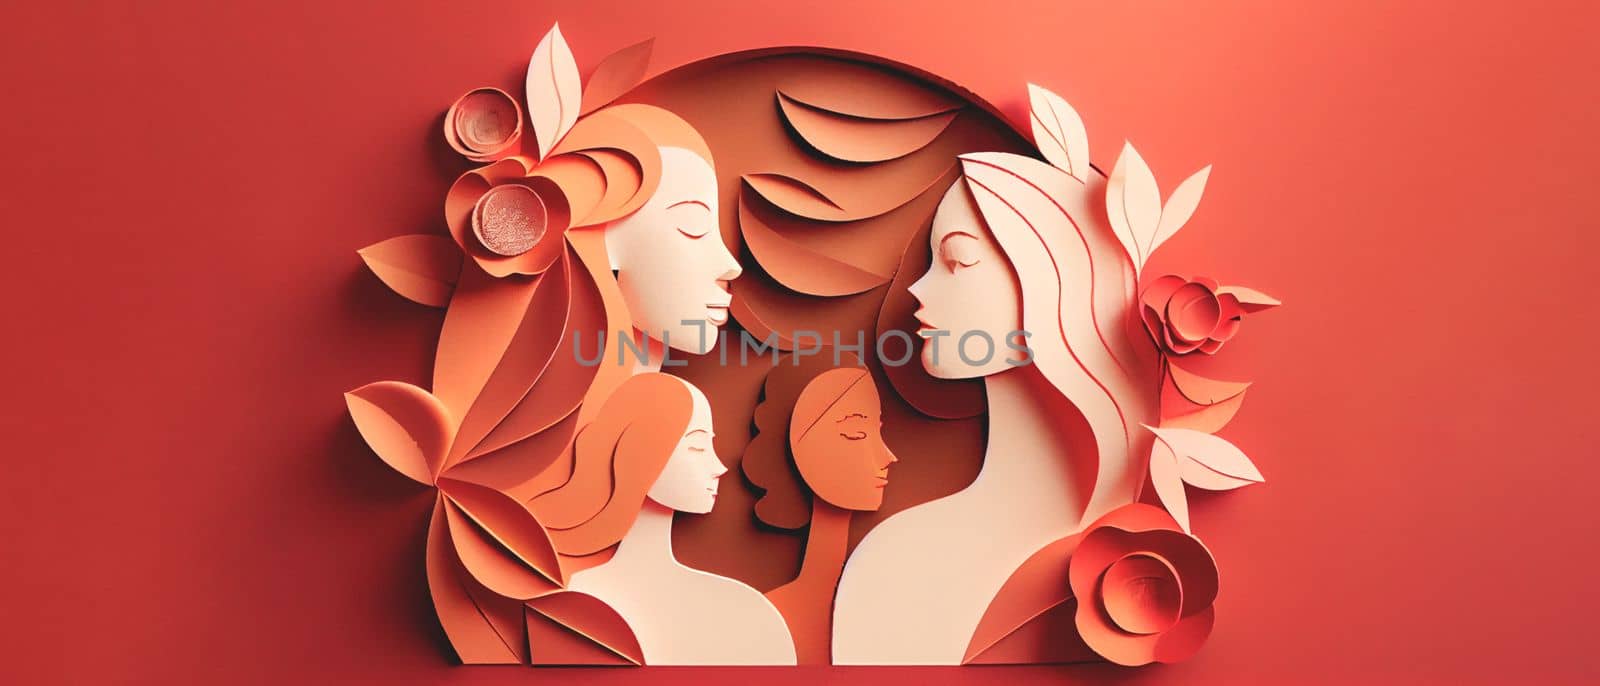 International Women's Day 8 march background with copy space. Woman Head Illustration from Side View Happy Women's Day. Template for UI, Web, Banner, or Greeting Card. Wide angle format banner. by FokasuArt